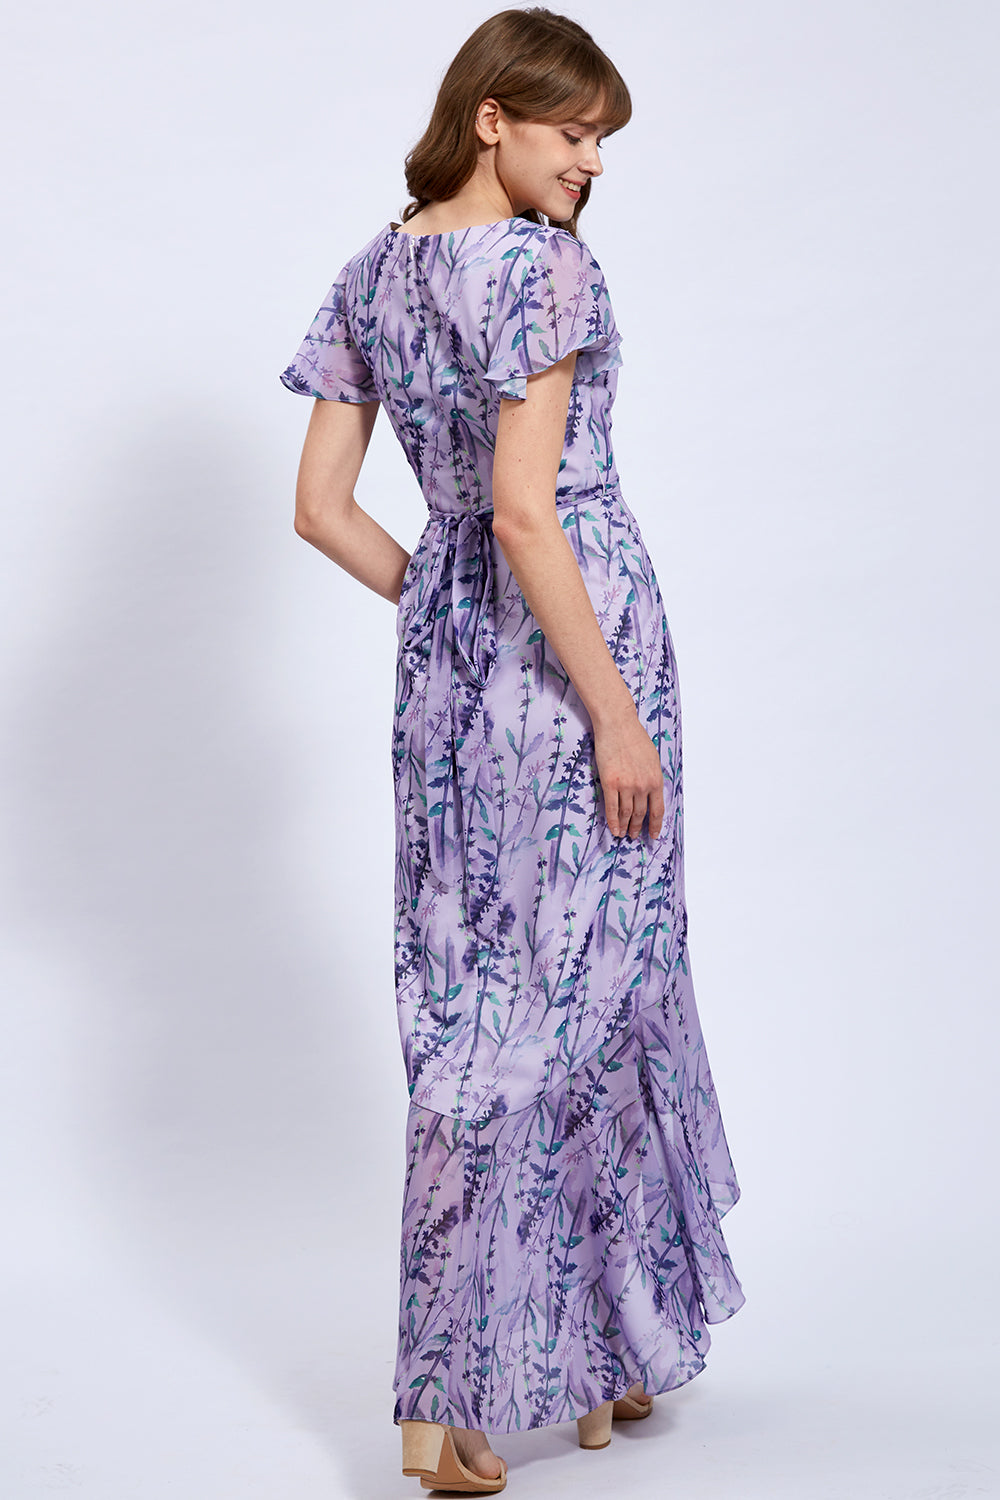 Cape Sleeves Chiffon Print Floral Wisteria Floor Length Formal Evening Gown